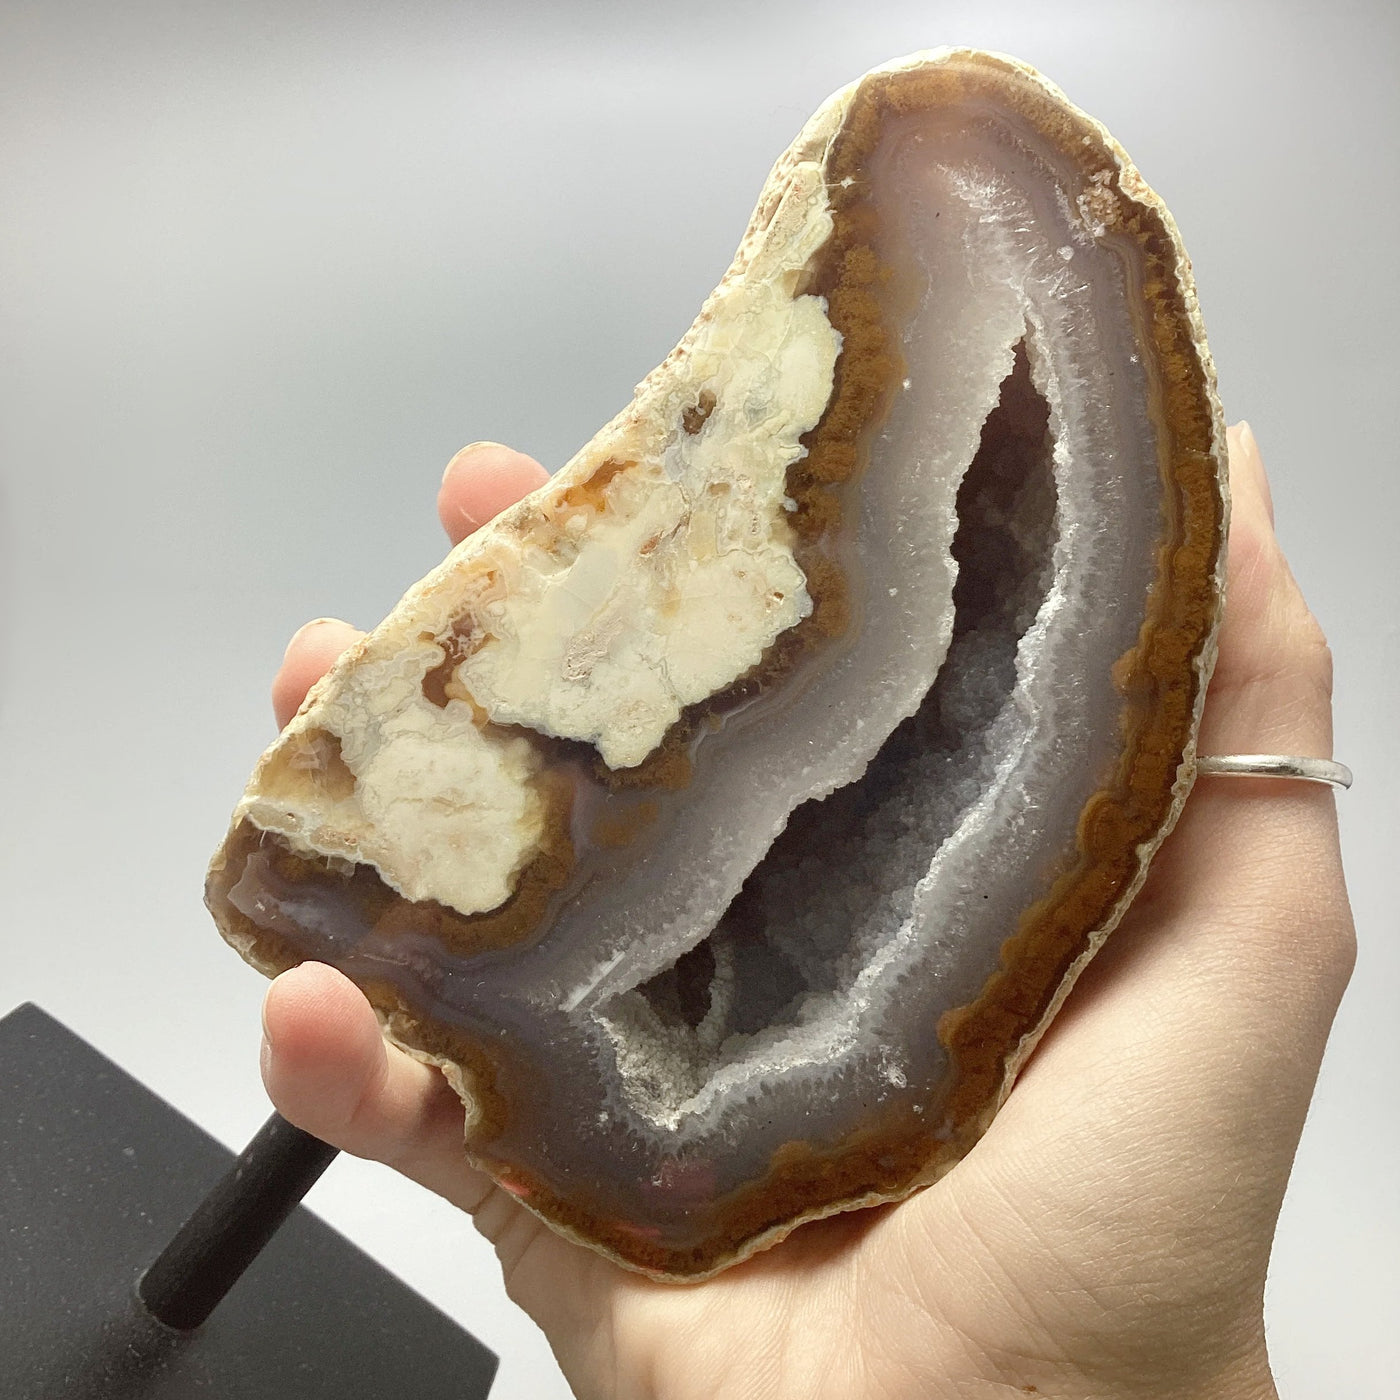 Natural Agate Geode on Stand